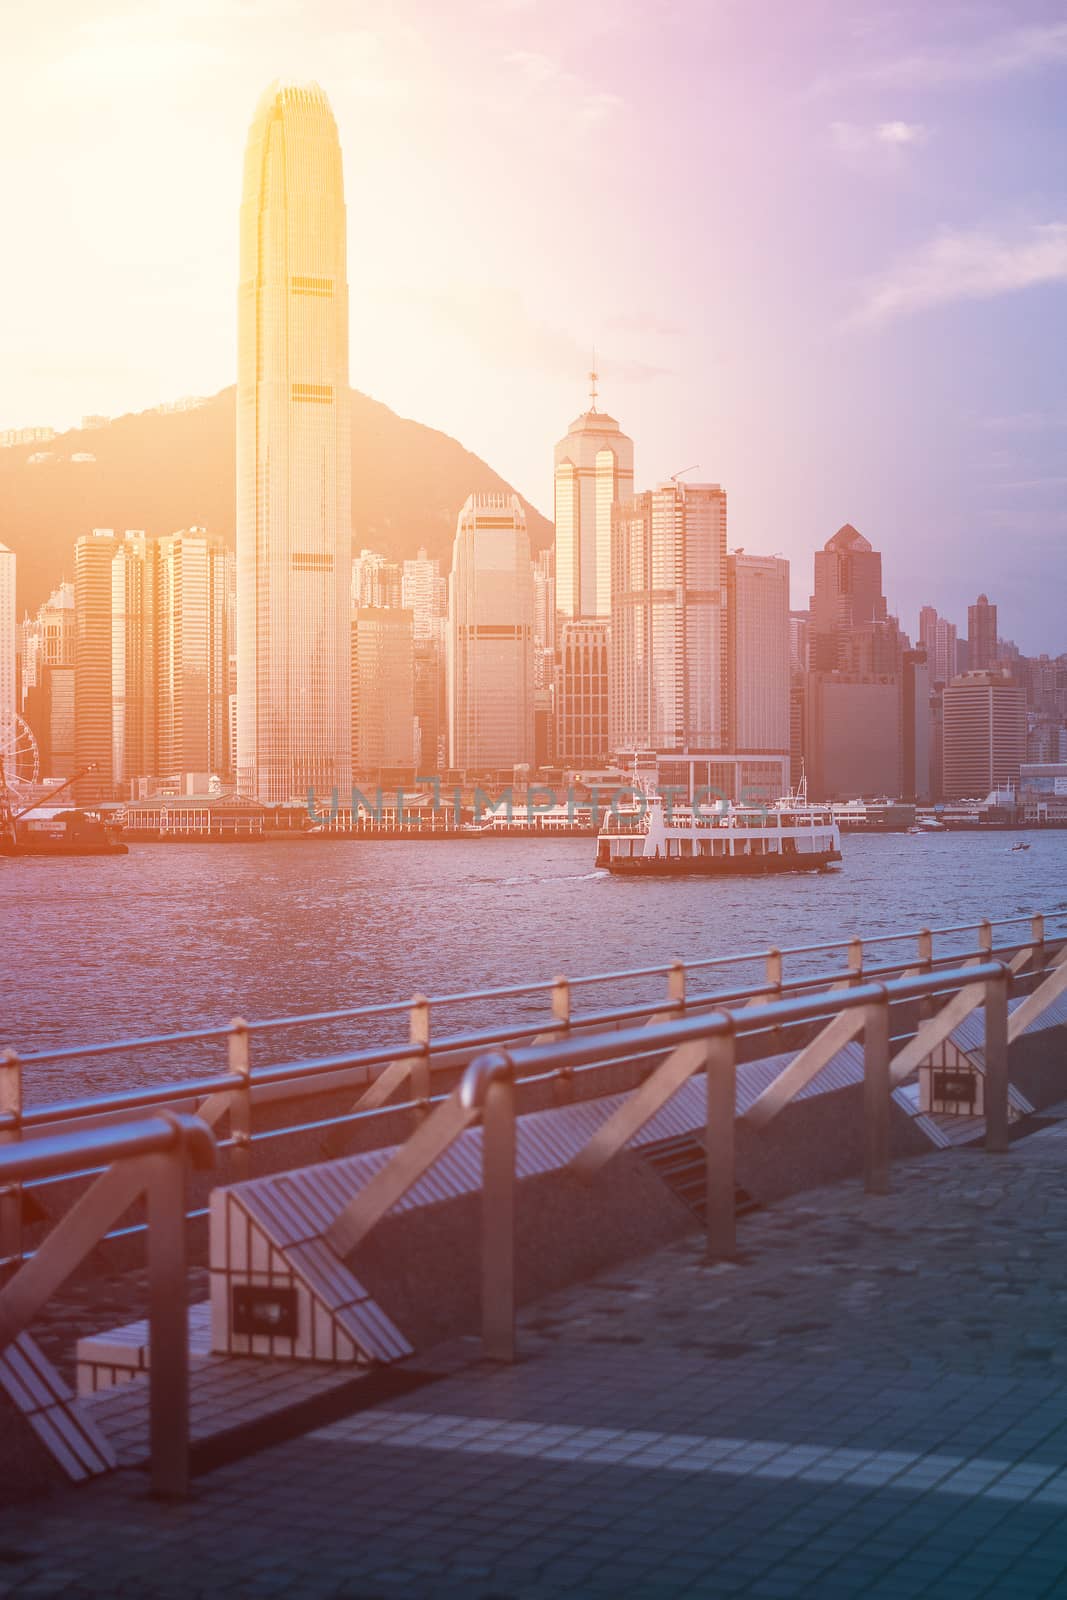 Hong Kong's Victoria Harbour in sunrise
